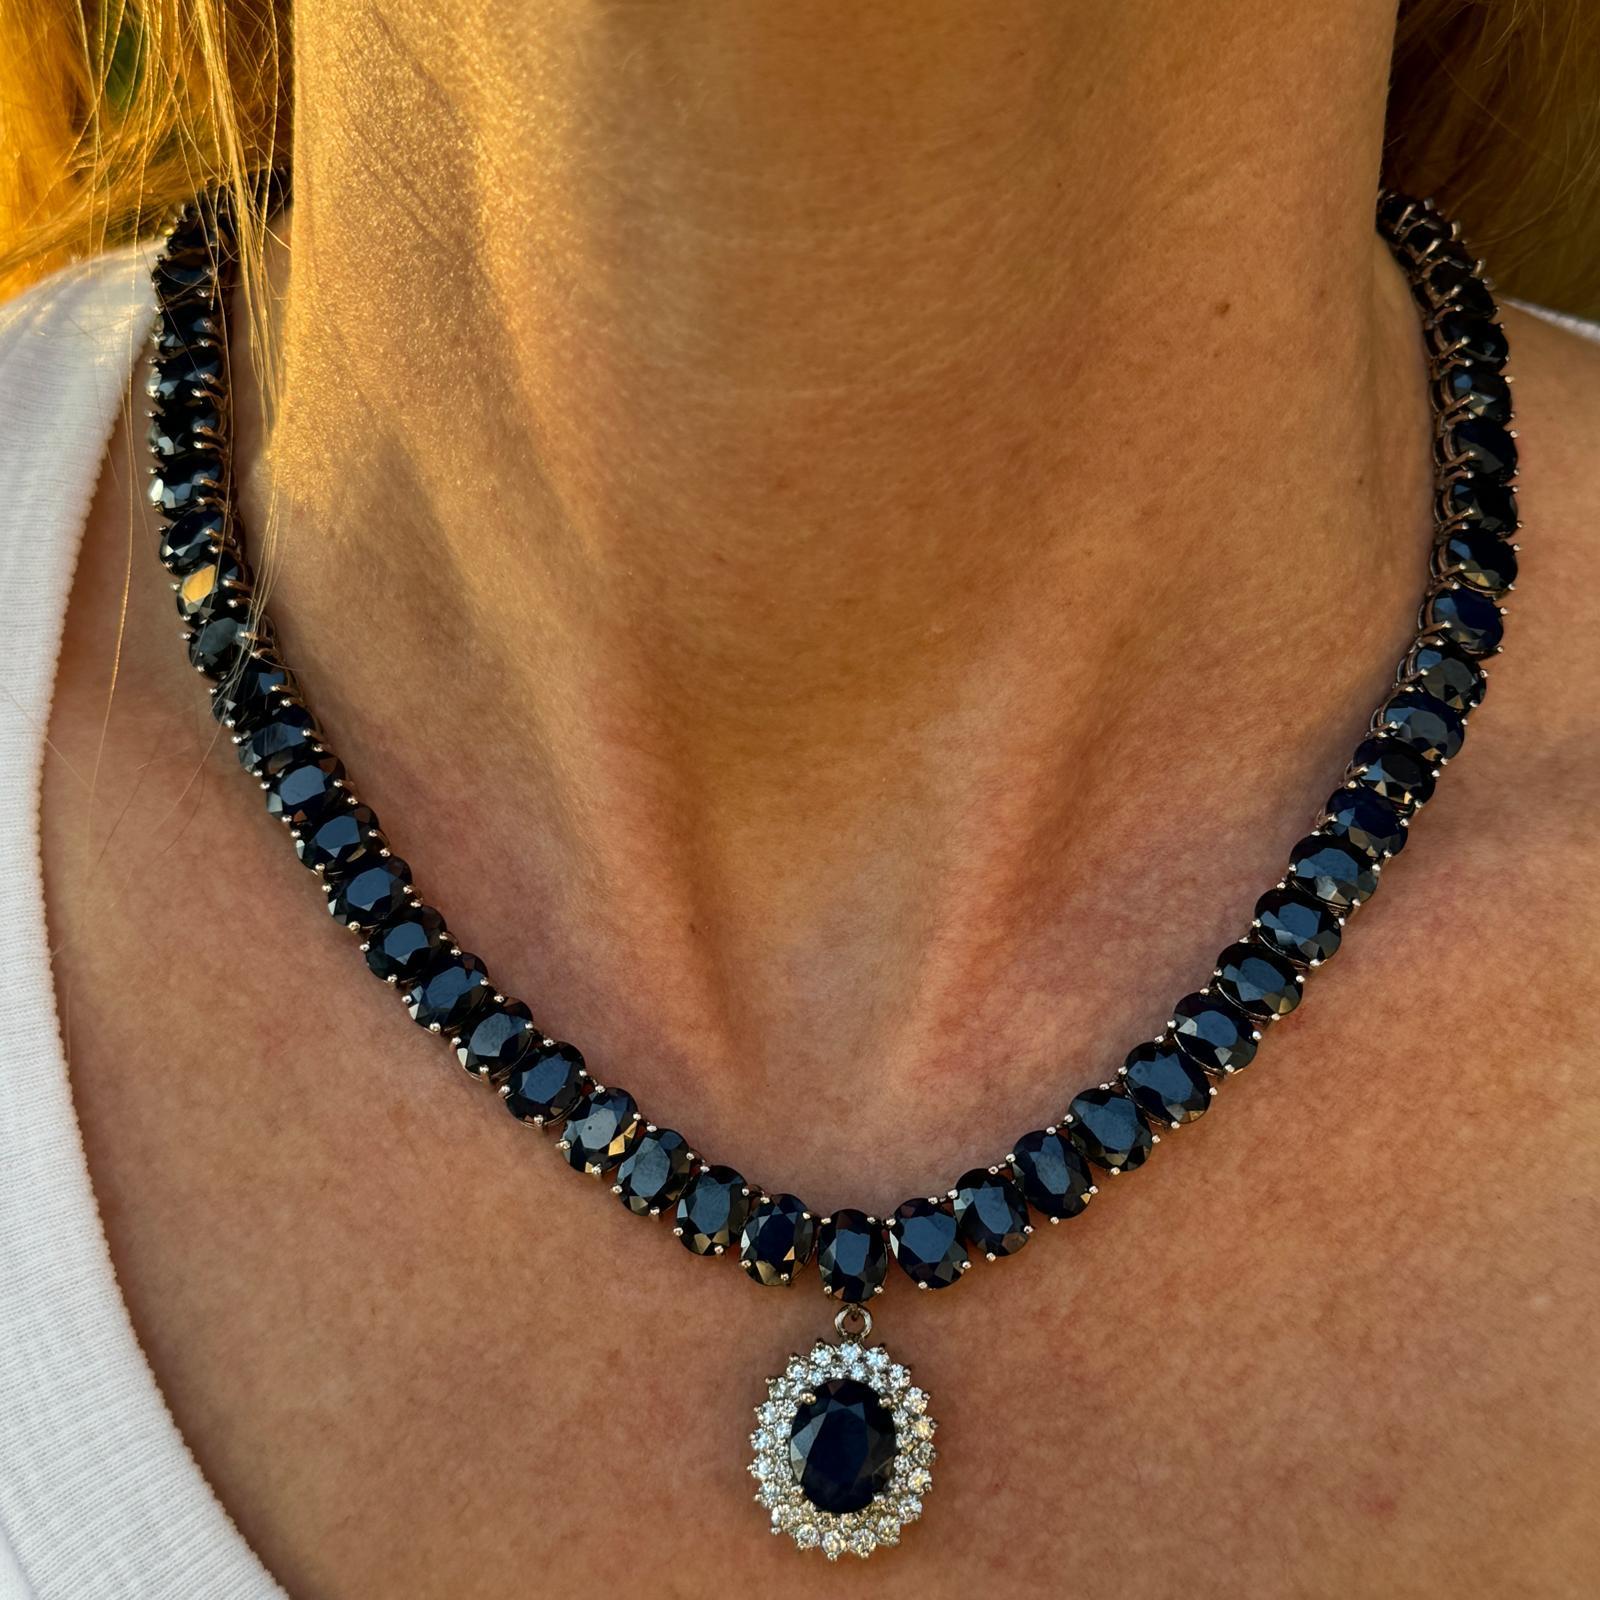 Impressive sapphire gemstone necklace crafted in 14 karat white gold and detachable diamond and sapphire drop pendant. The necklace and pendant feature 73 natural blue sapphires weighing approximately 105.5 carat total weight. The pendant features